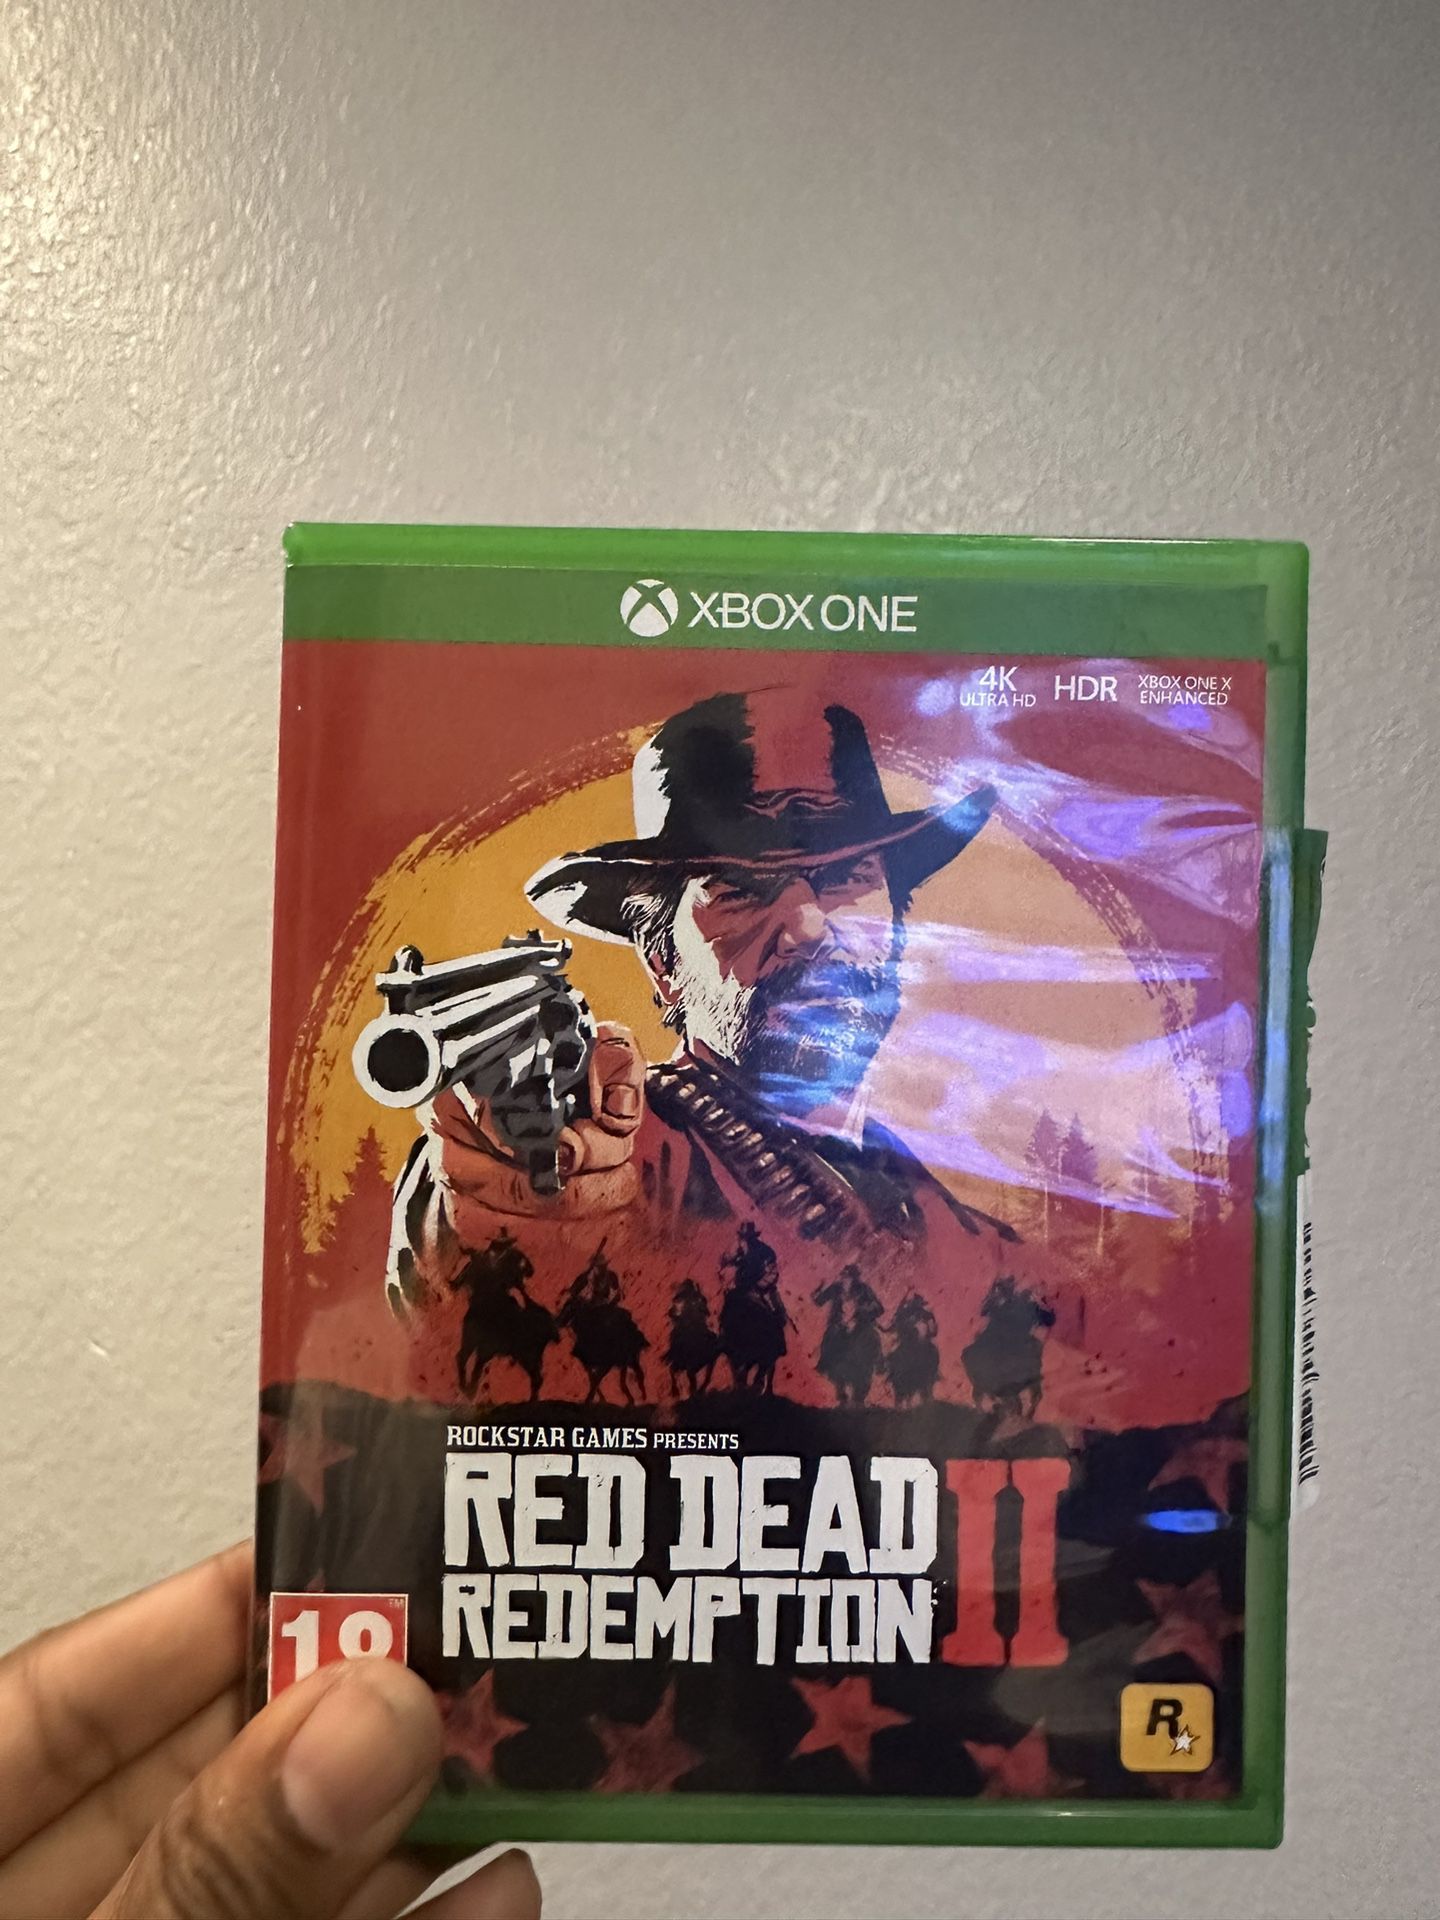 Red dead Redemption 2 on Xbox One